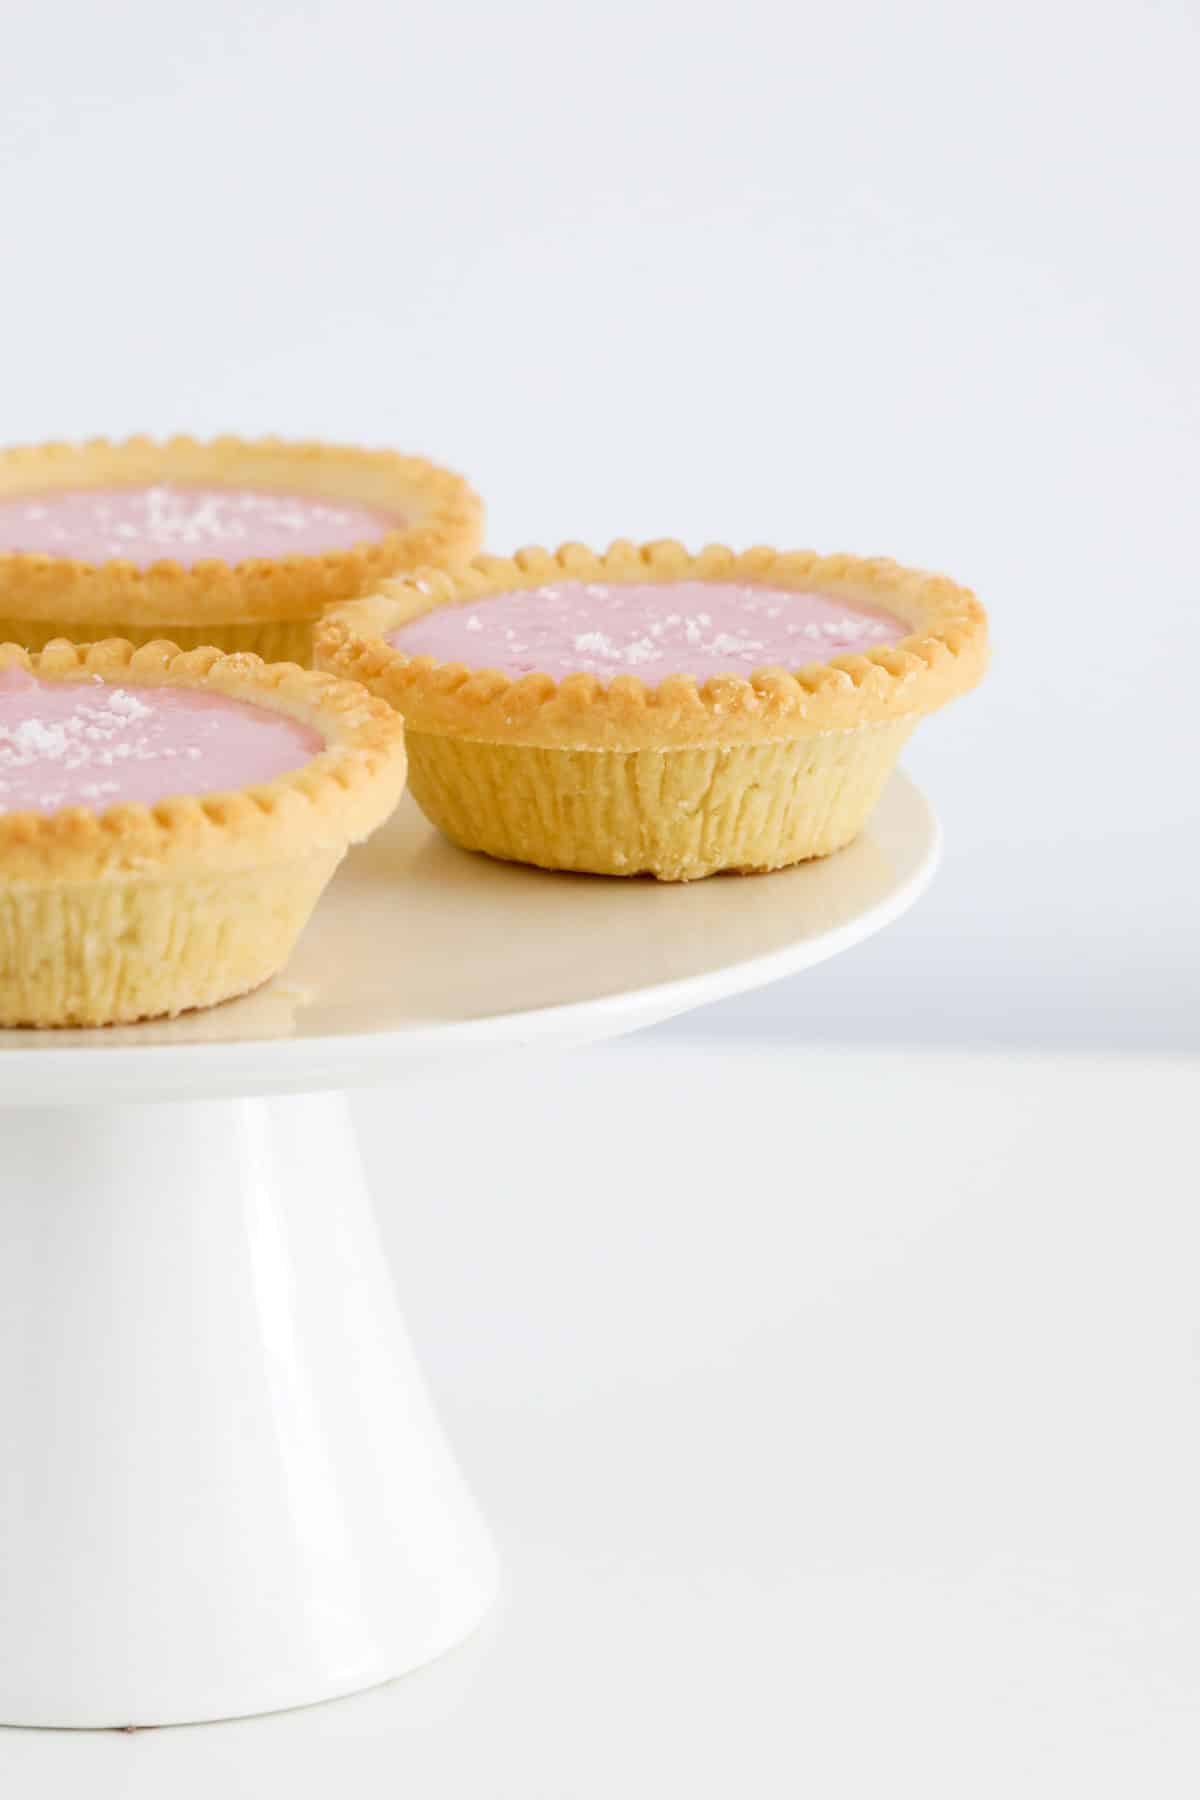 Mini pastry shells filled with pink marshmallow filling on a cake stand.